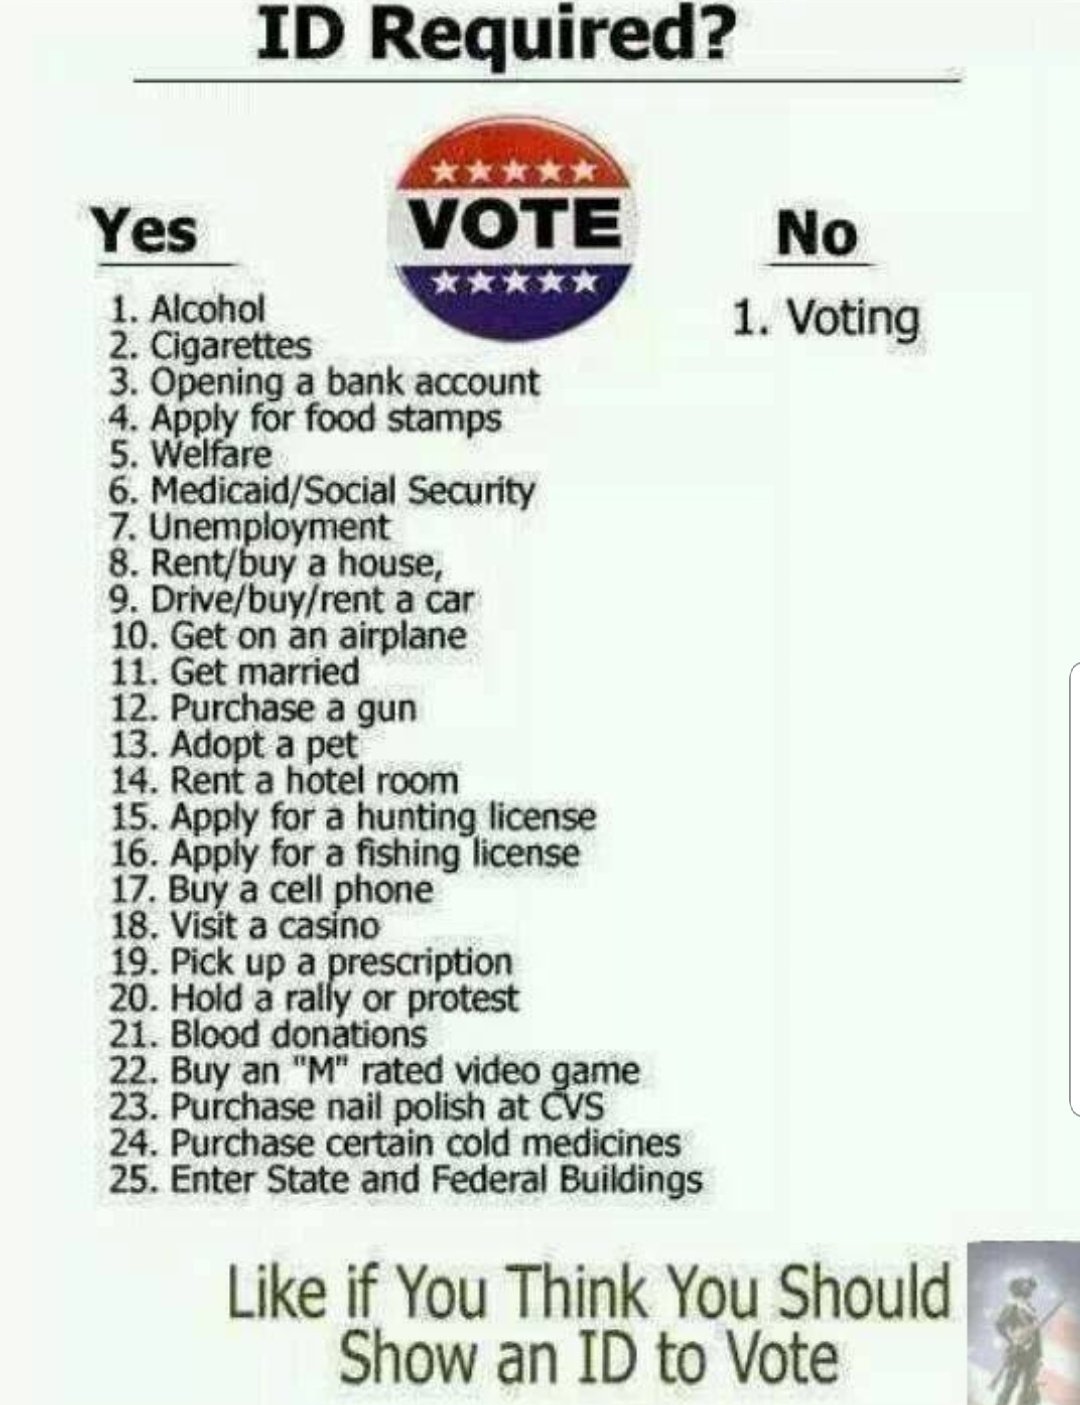 ?Victoria Gates⭐⭐⭐ on Twitter: "You need an ID for all these but not to Vote?#VoterID #QAnon #MAGA https://t.co/FtrkKpQ6h4… "